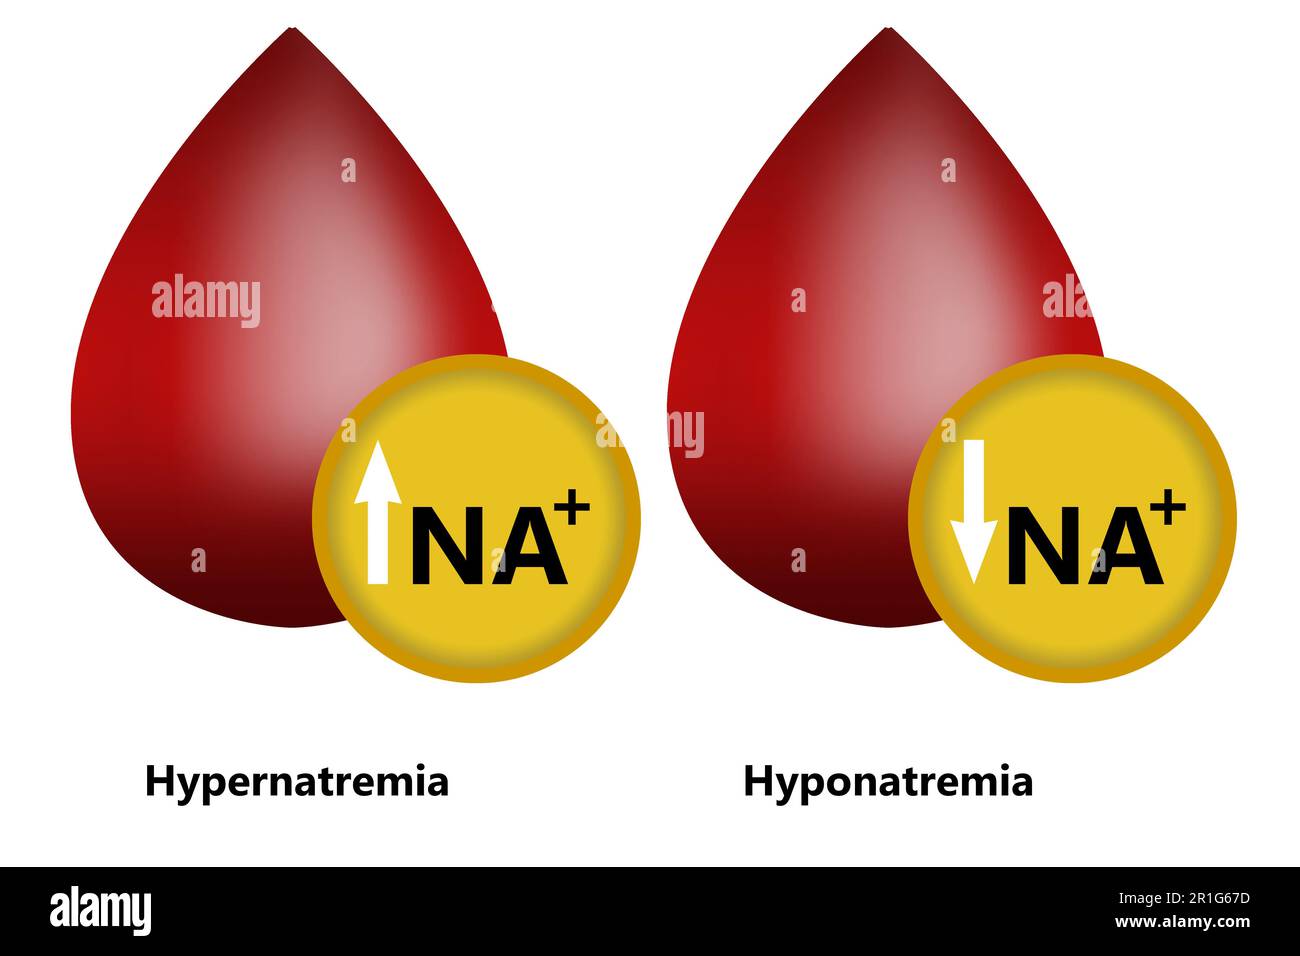 Hypernatremia and Hyponatremia with blood shape, 3d rendering Stock Photo